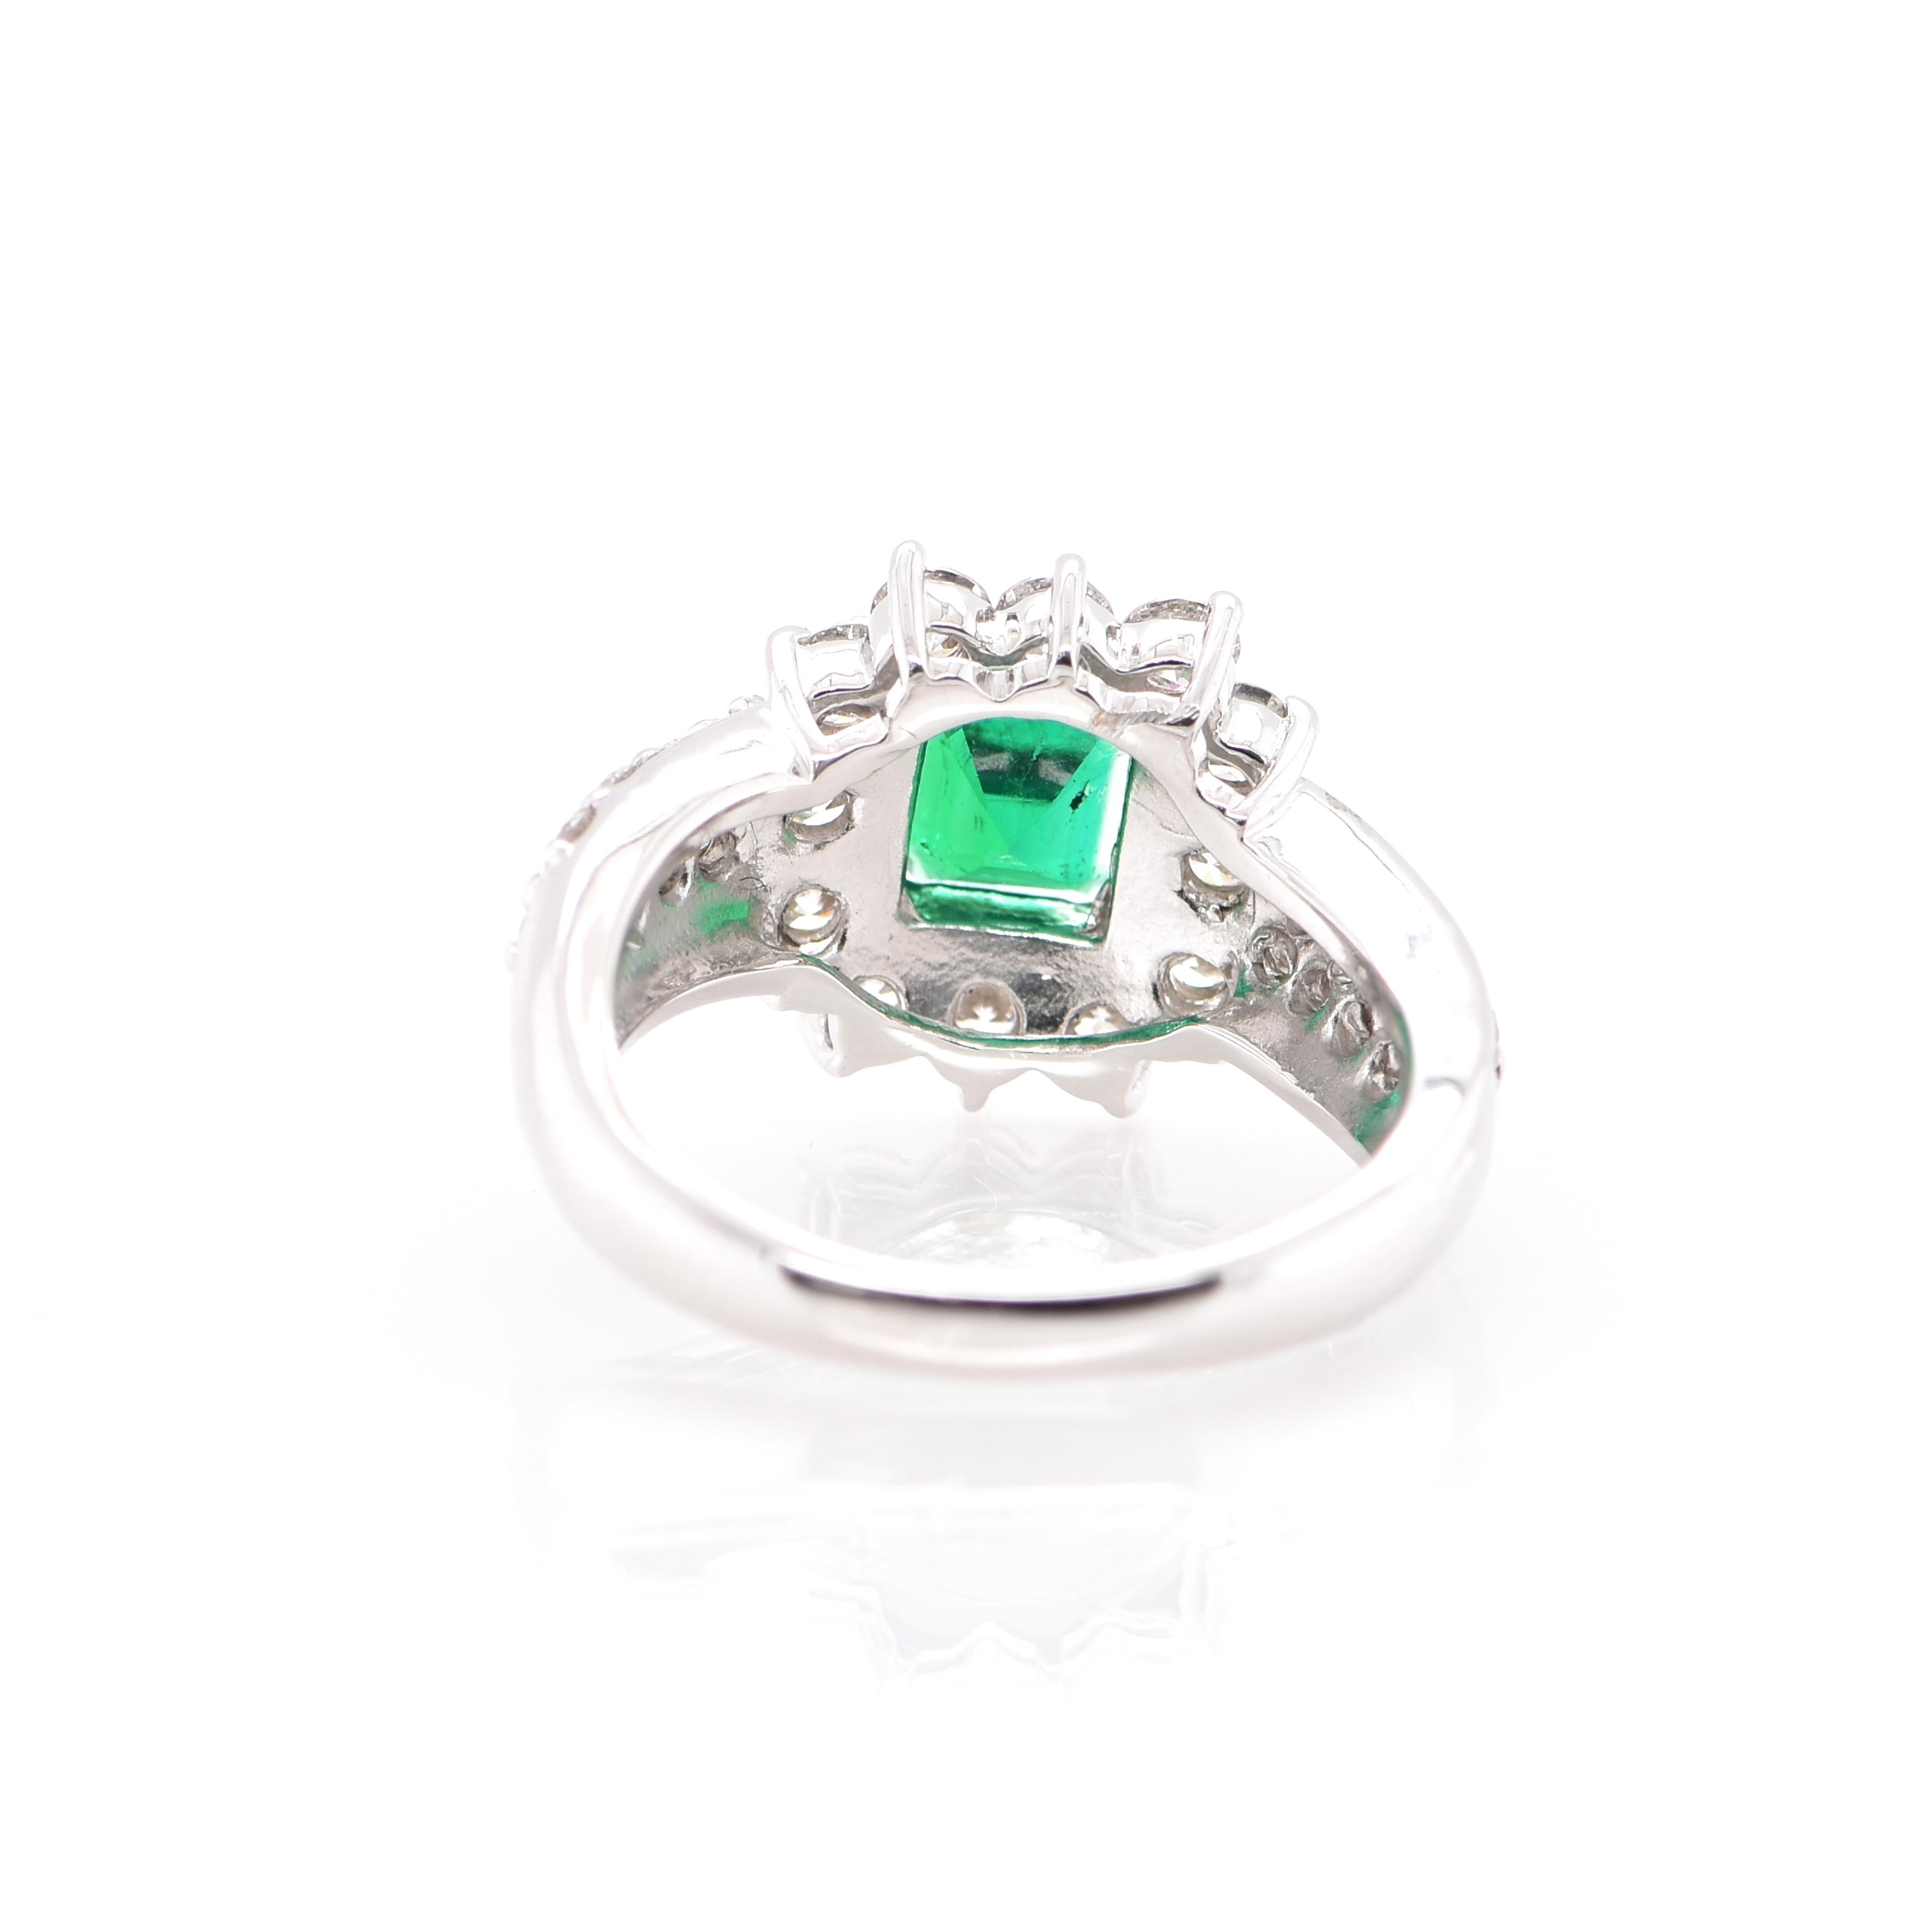 0.90 Carat Natural Vivid Green Emerald and Diamond Ring Set in Platinum For Sale 1